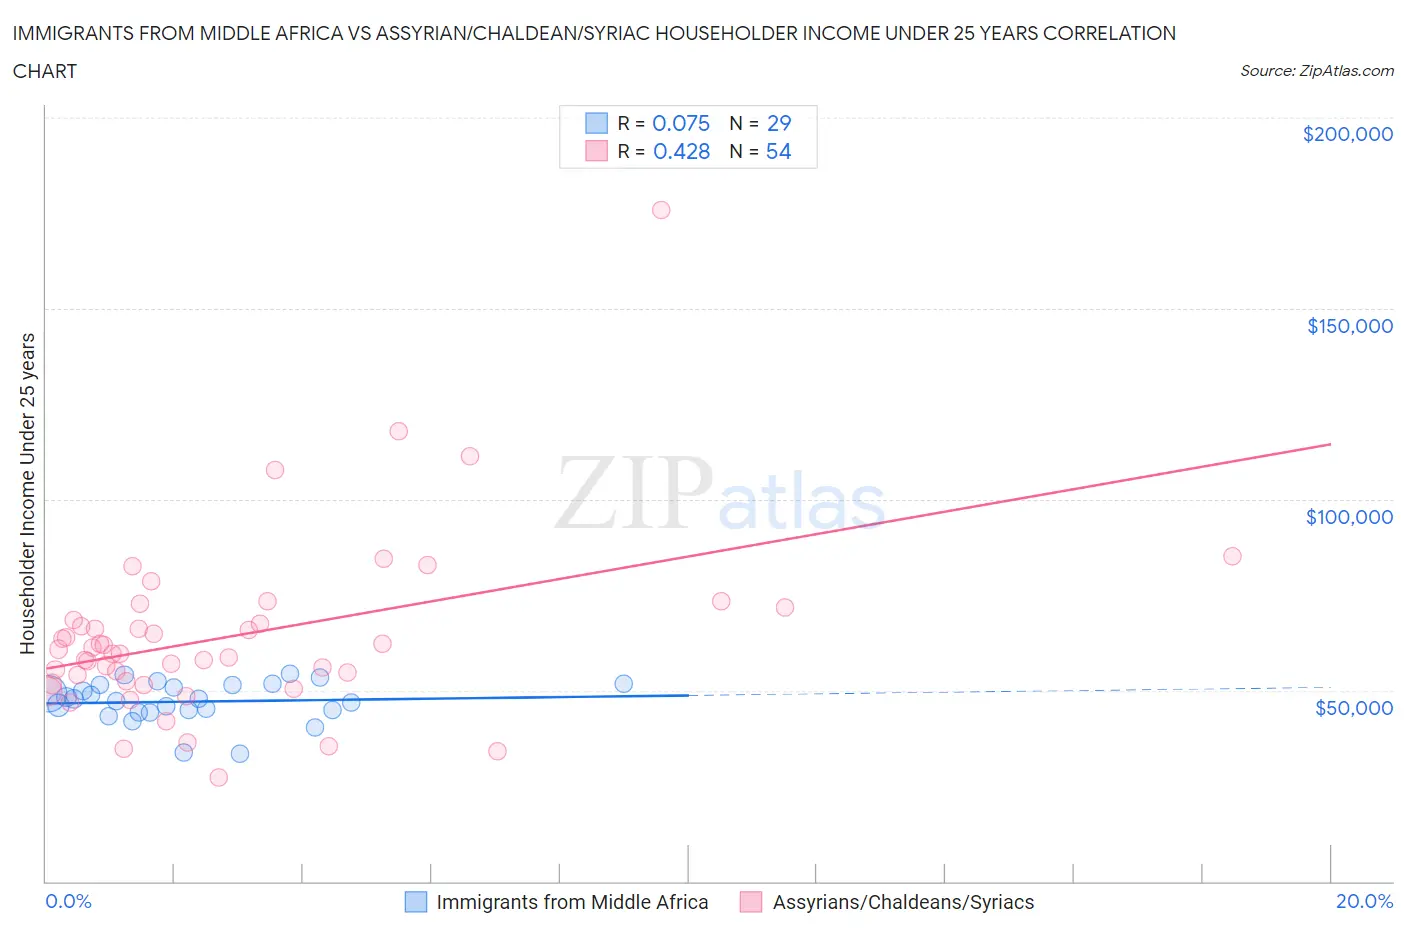 Immigrants from Middle Africa vs Assyrian/Chaldean/Syriac Householder Income Under 25 years